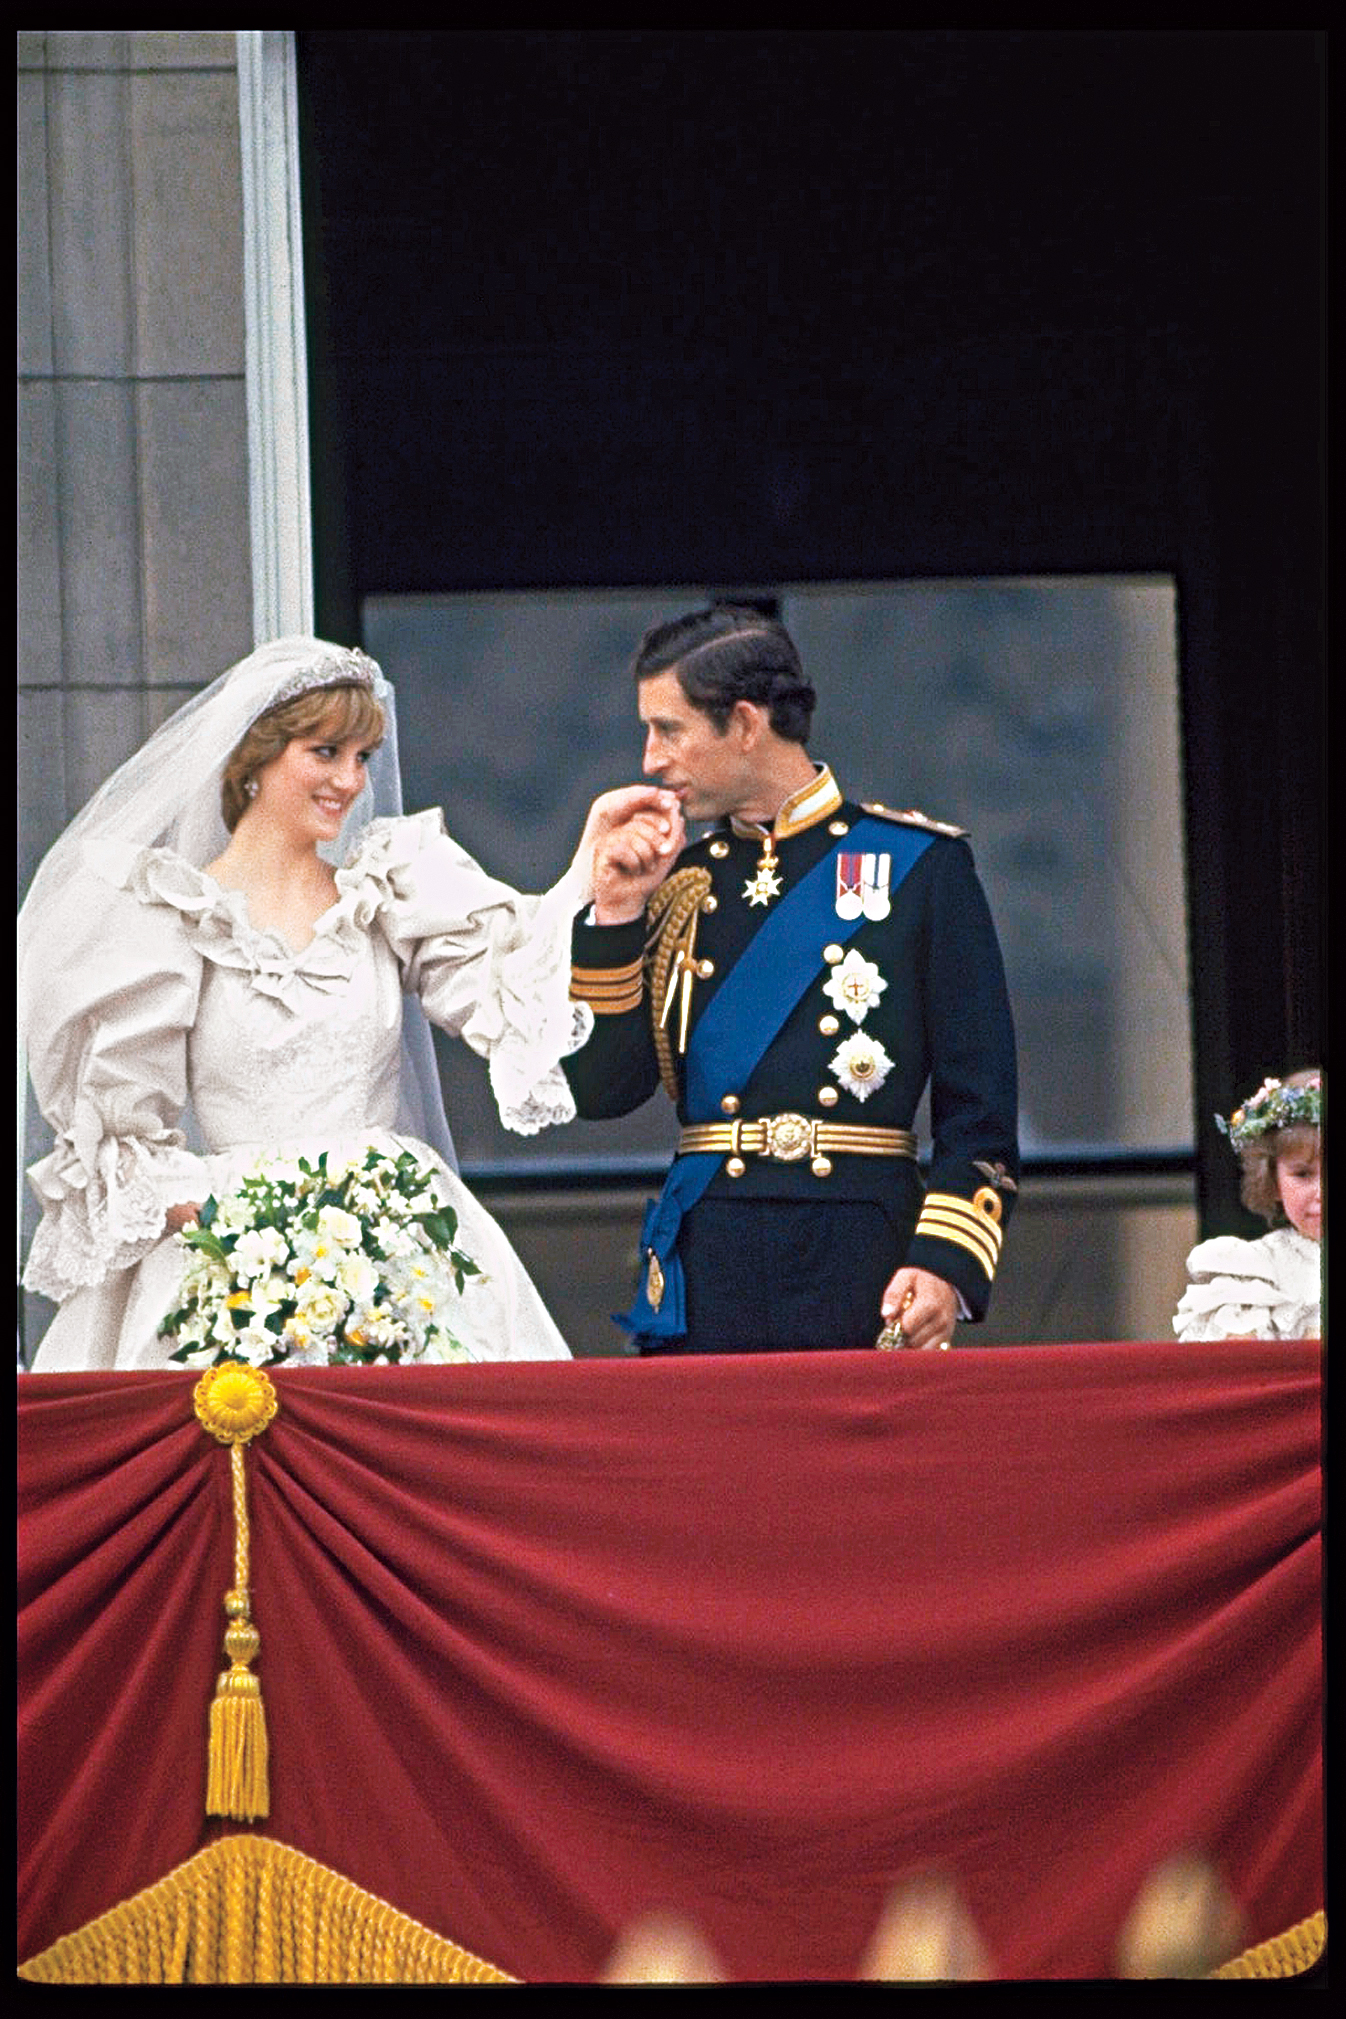 Marriage of Charles and Diana, July 29, 1981.